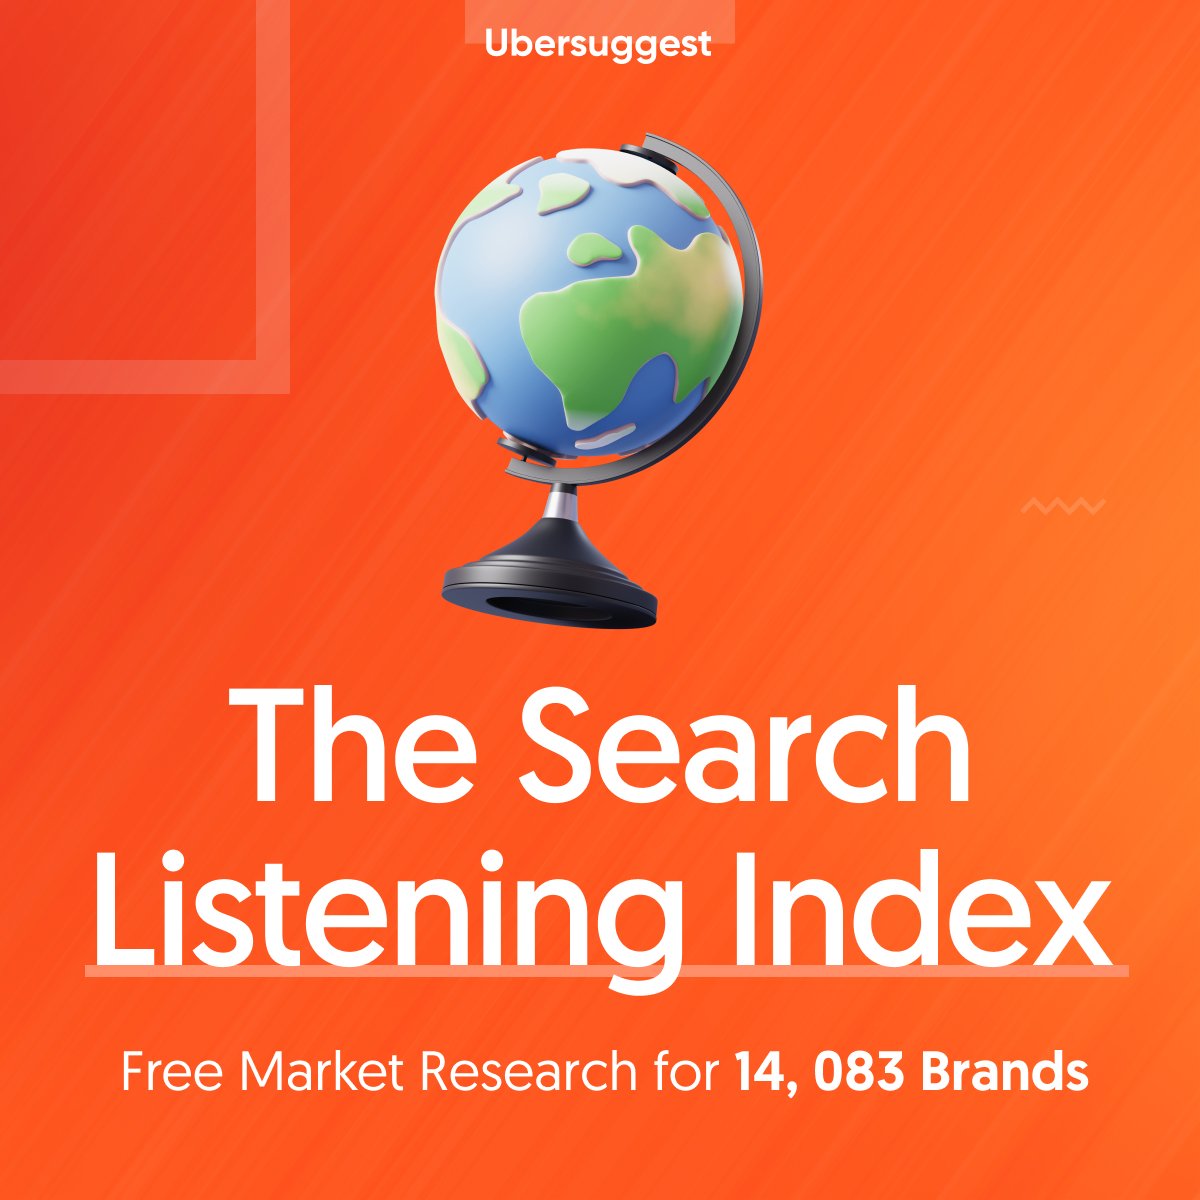 Our favorite, free resource at @answerthepublic is the Search Listening Index! The Search Listening Index is free market research for 14,083 brands (and counting) from sports brands to banks to coffee companies. eu1.hubs.ly/H01P2Sf0